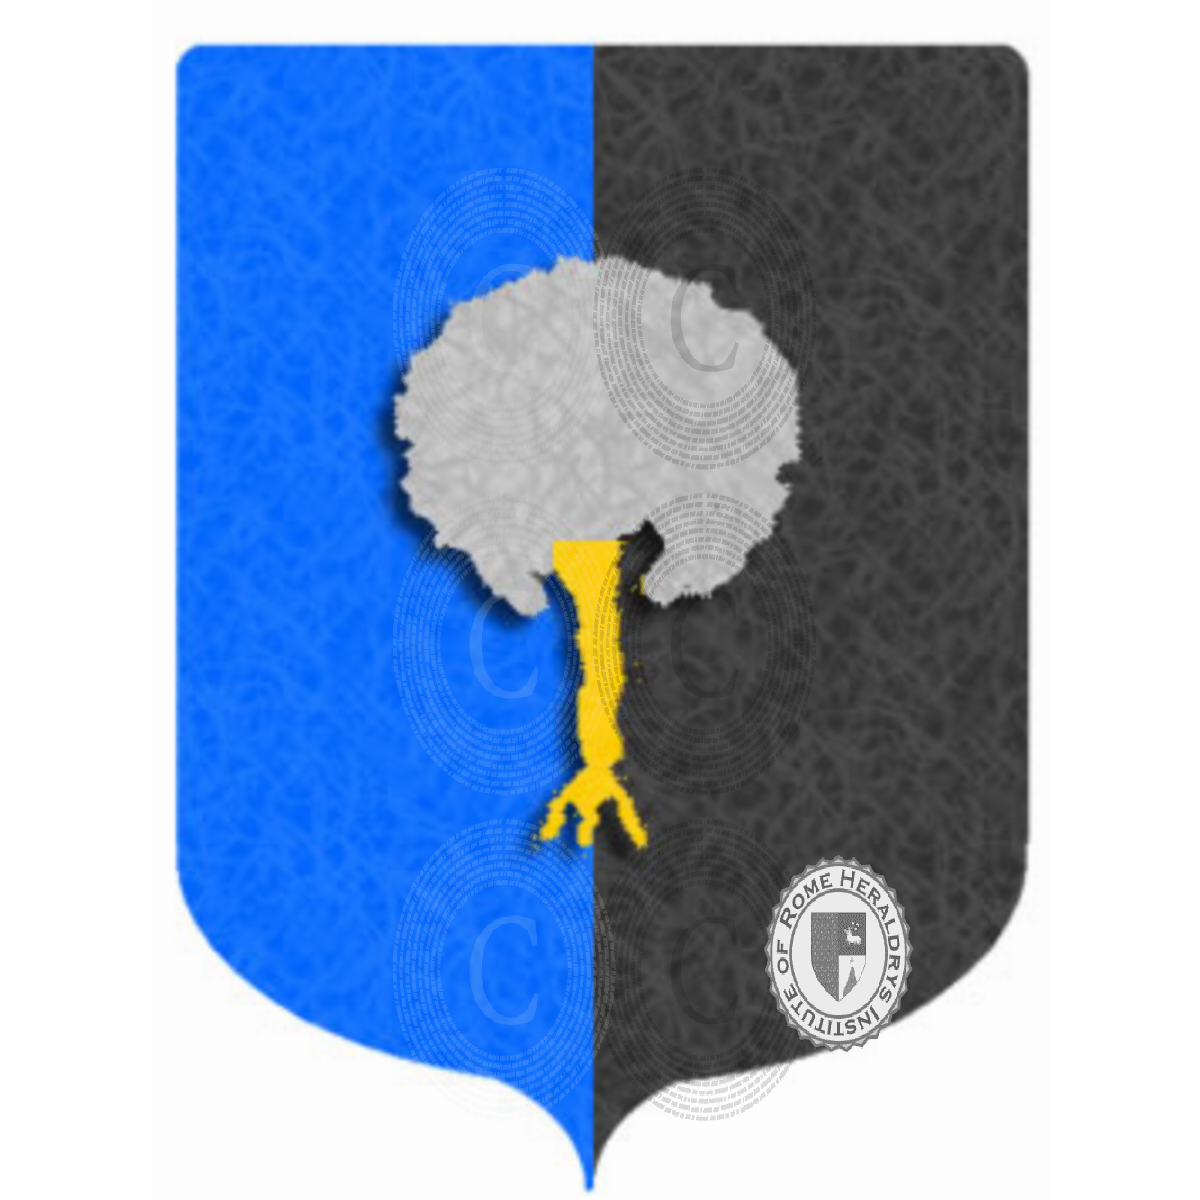 Coat of arms of familyMadia